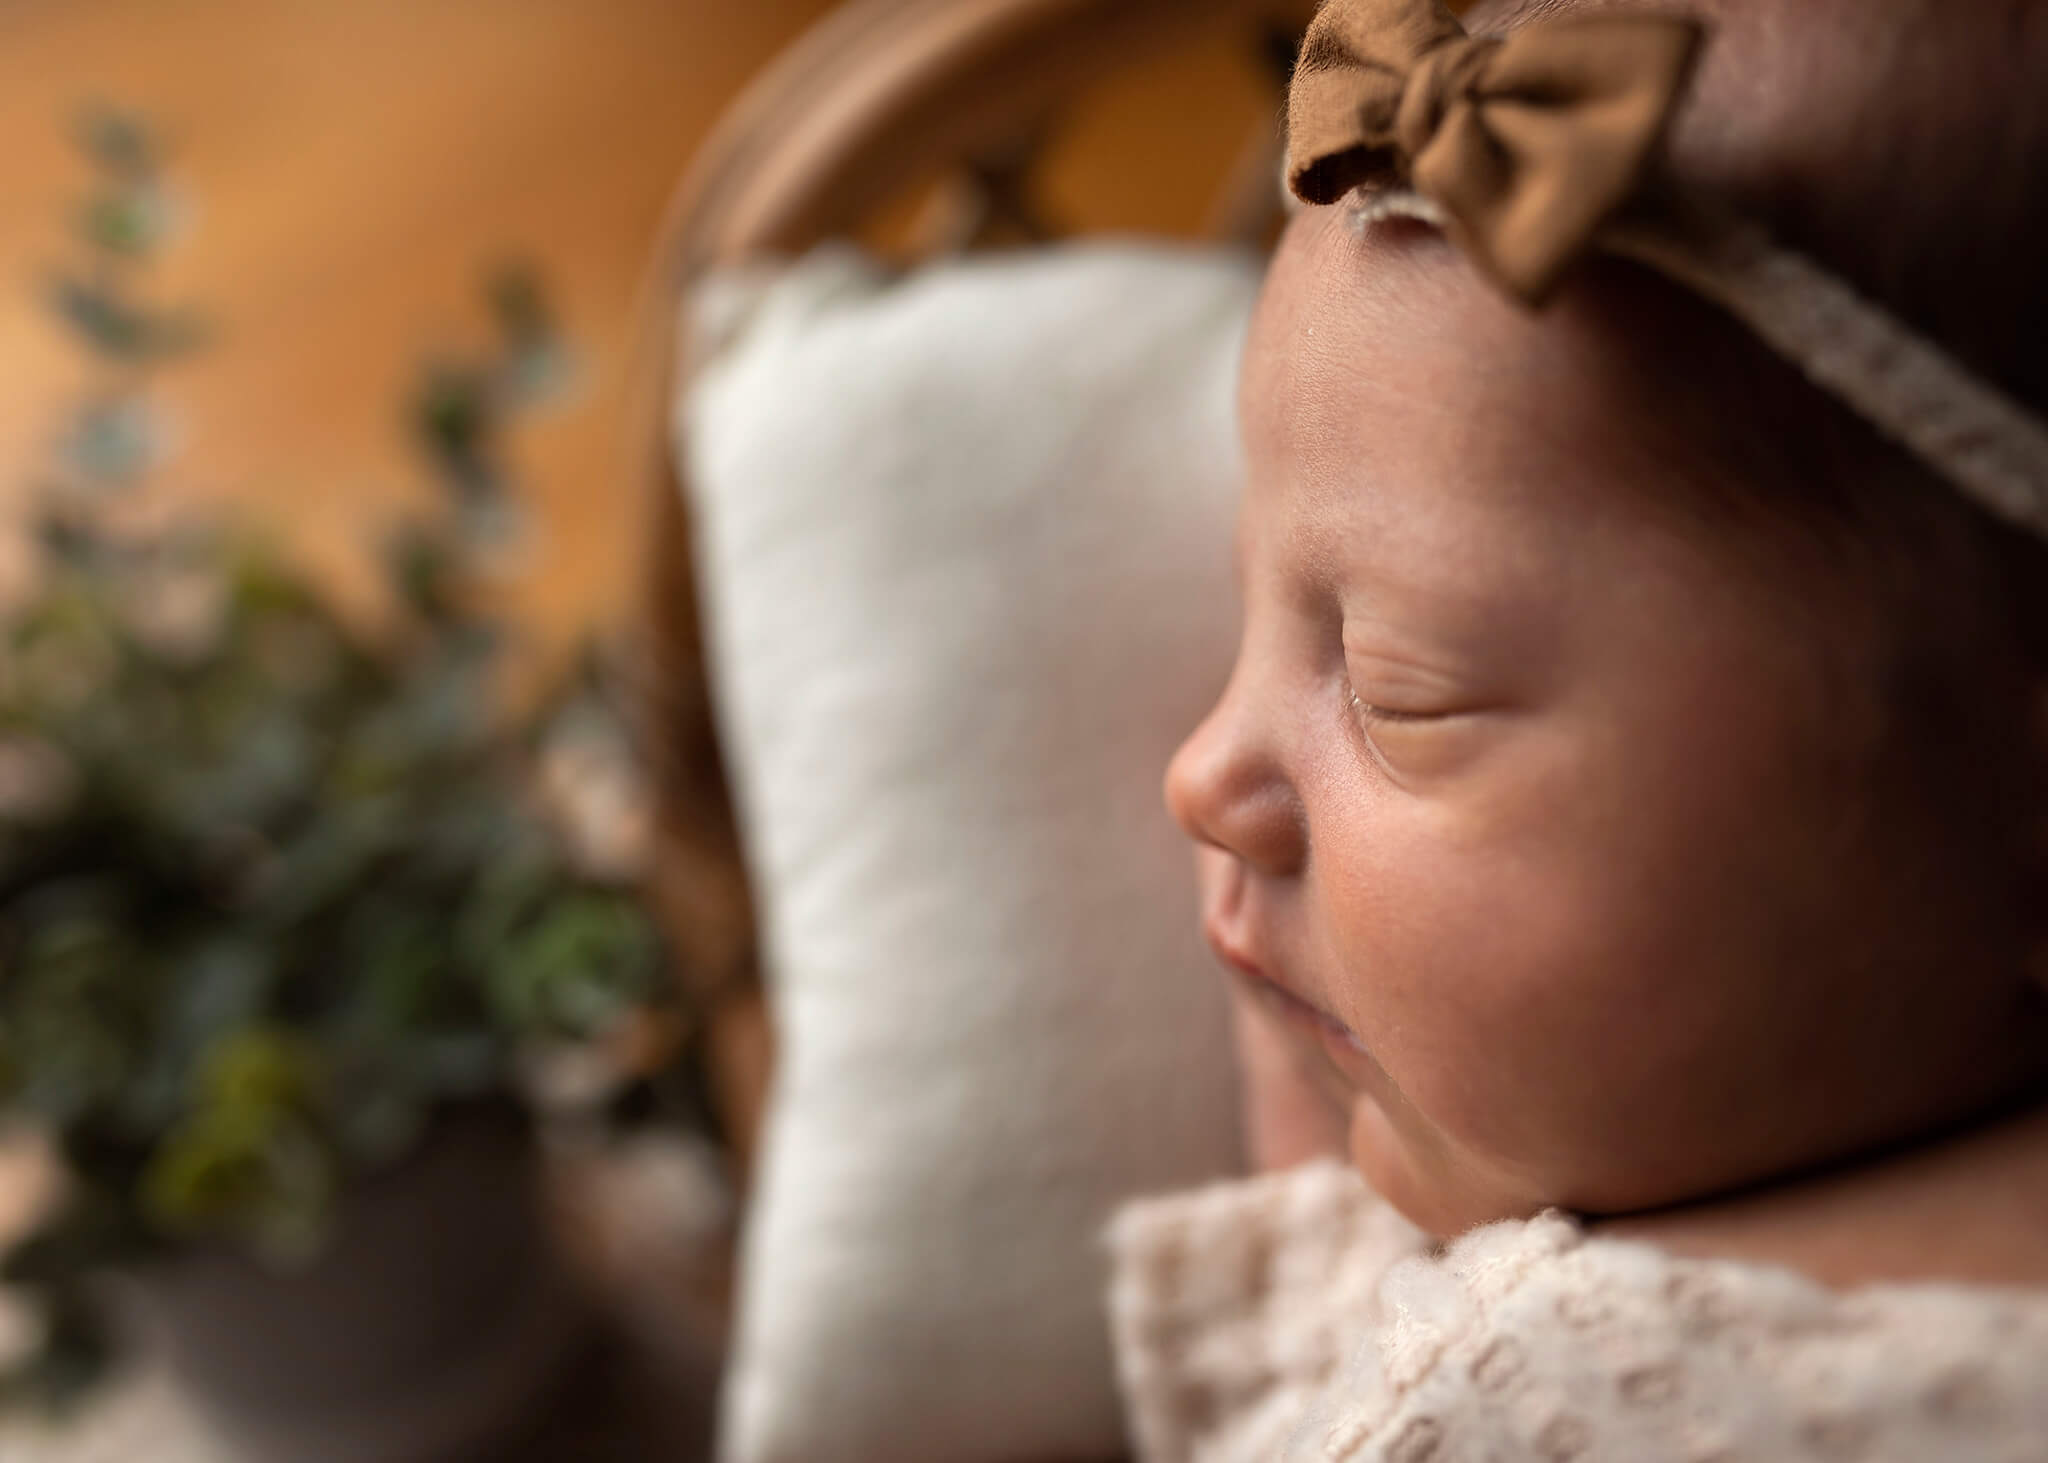 Profile of a newborn baby laying on a pillow. Midwives of New Jersey